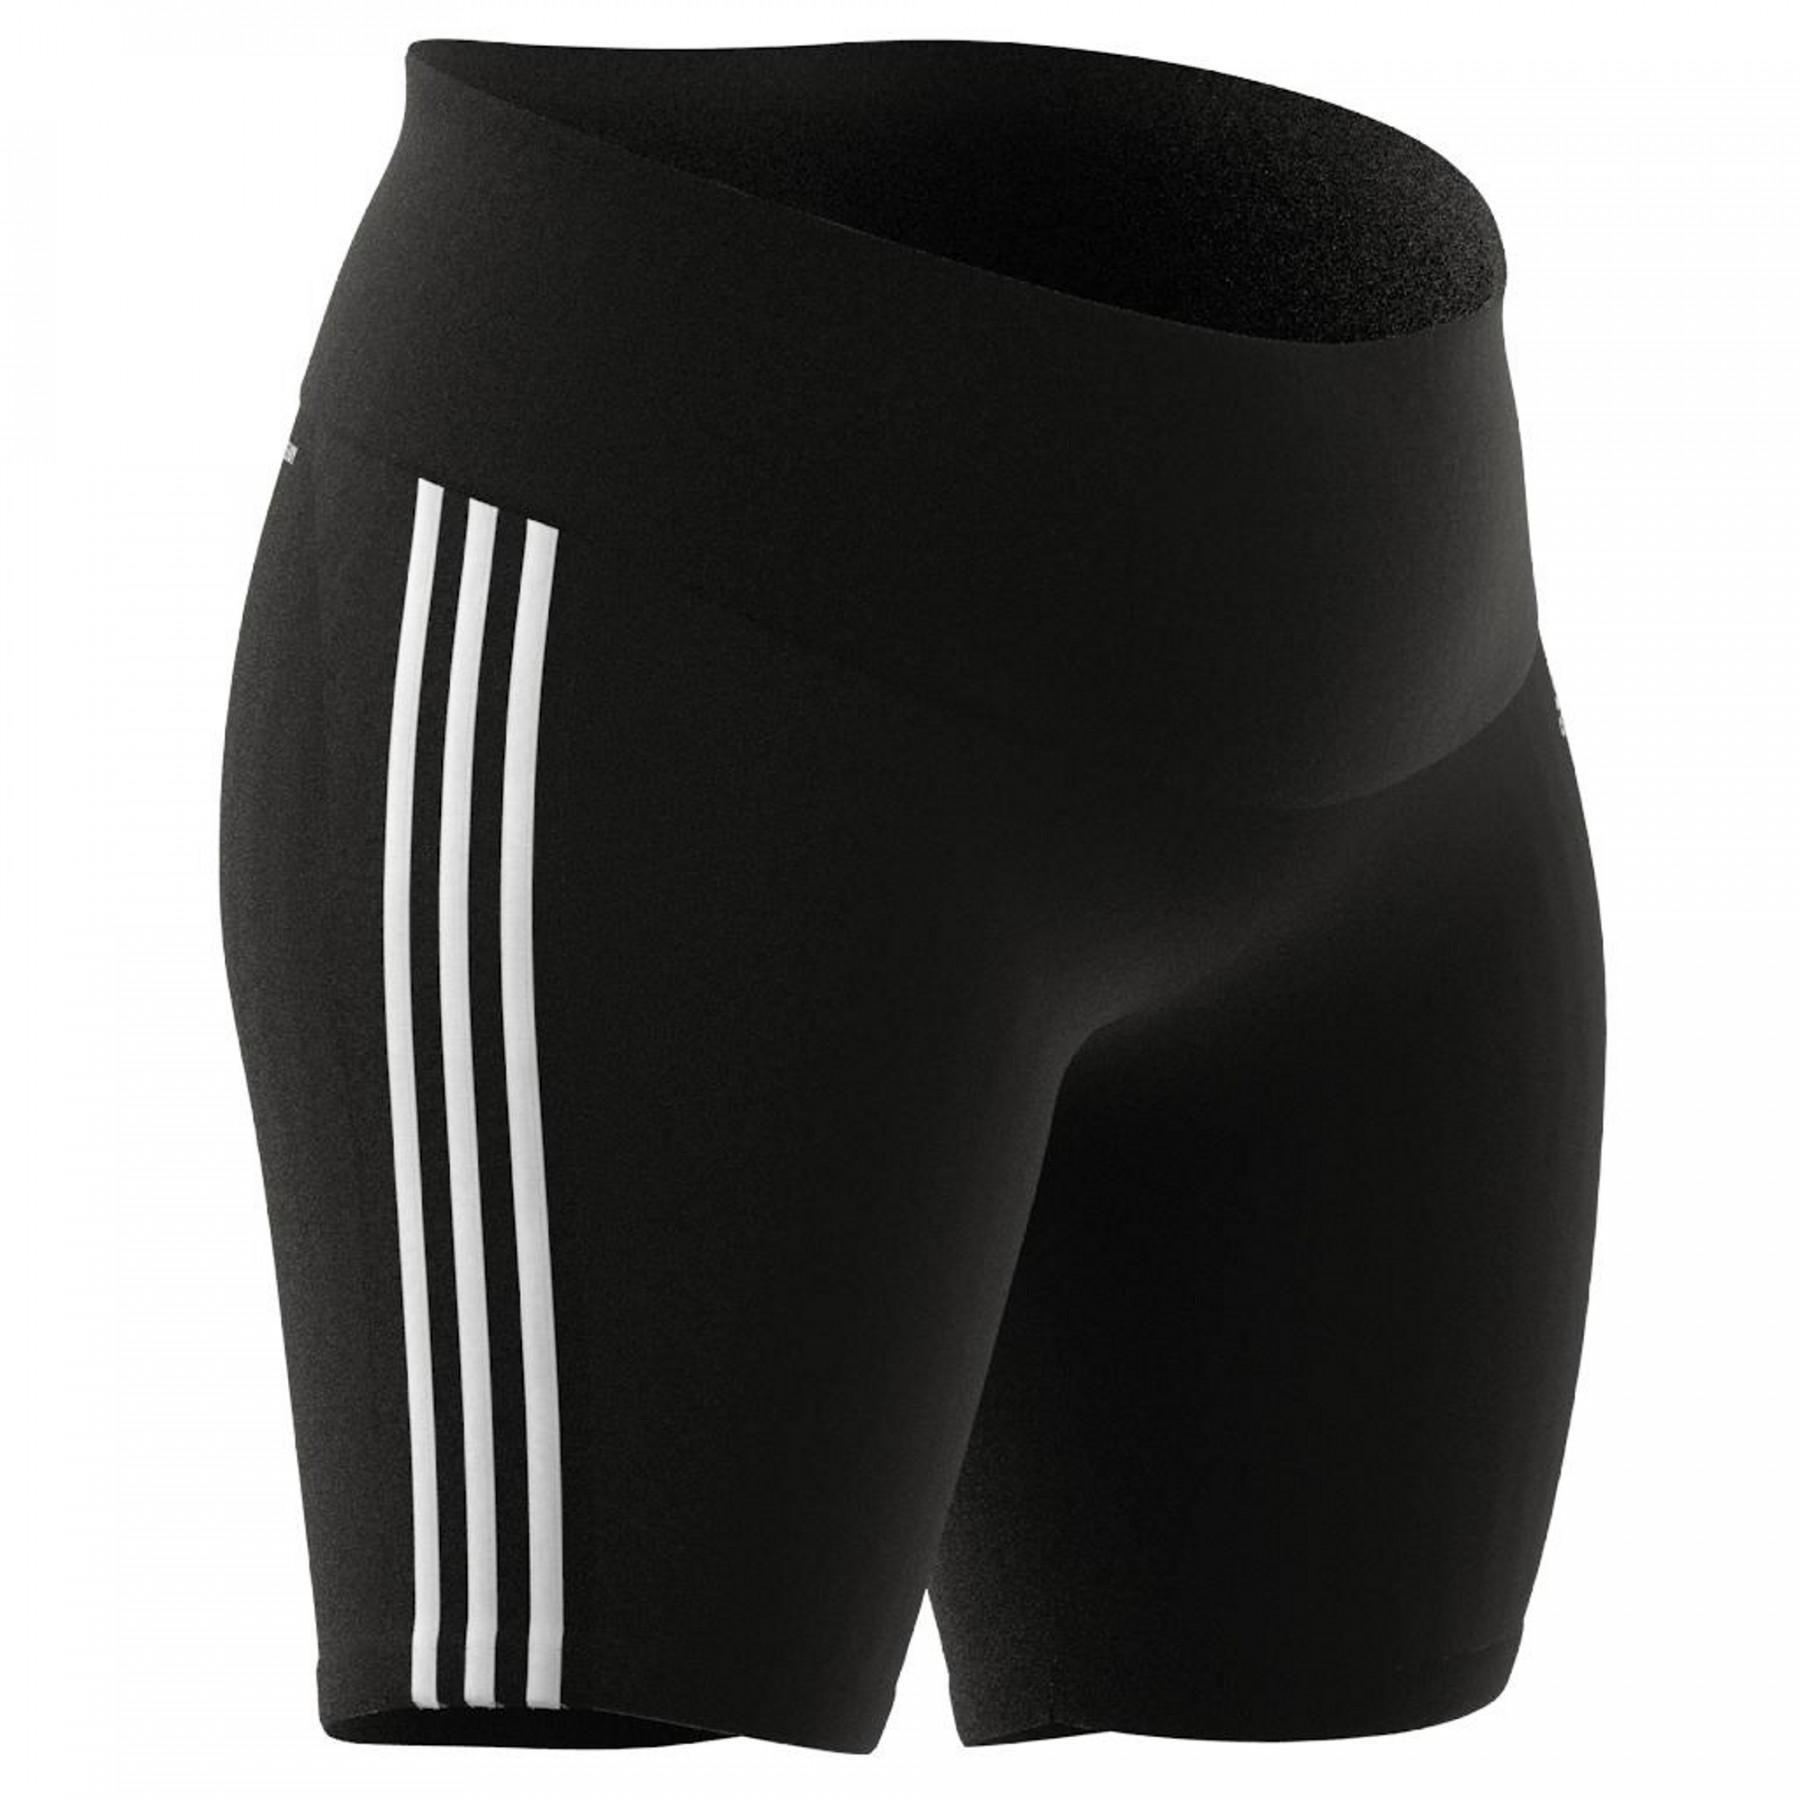 Cycliste femme adidas High Riseport Grande Taille